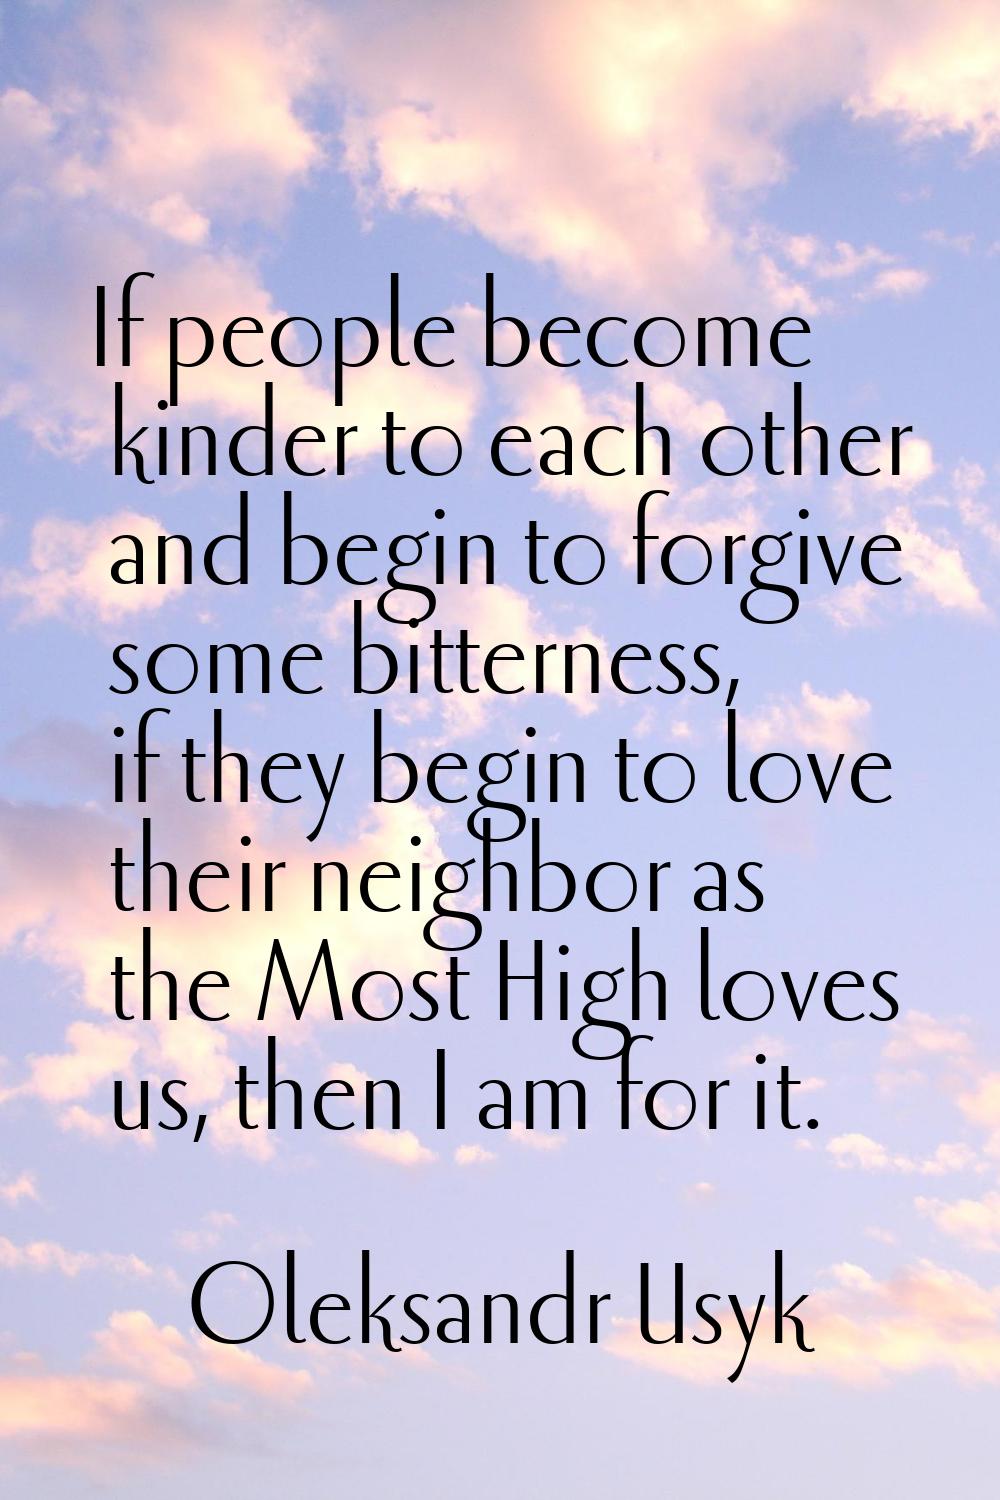 If people become kinder to each other and begin to forgive some bitterness, if they begin to love t